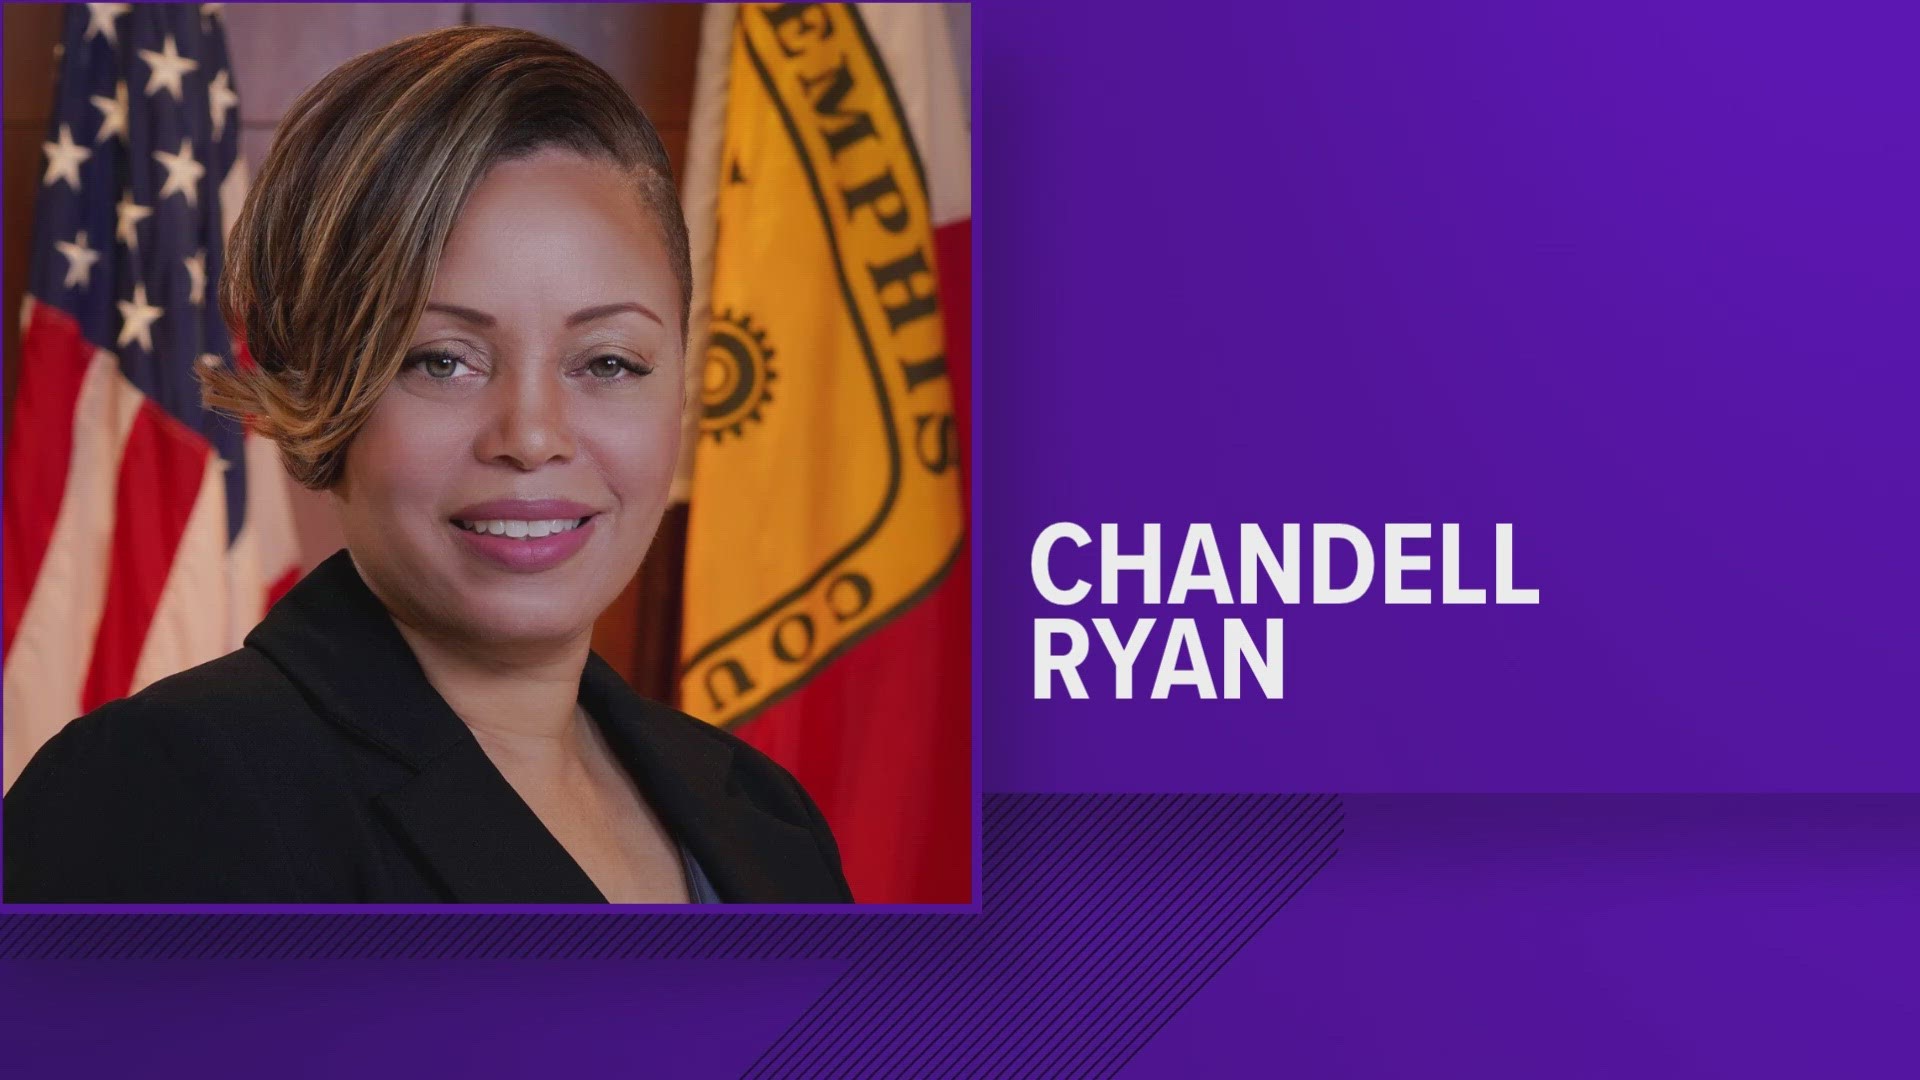 The Downtown Memphis Commission (DMC) Board of Directors announced in a press release Wednesday that Chandell Ryan will become the commission's next president.